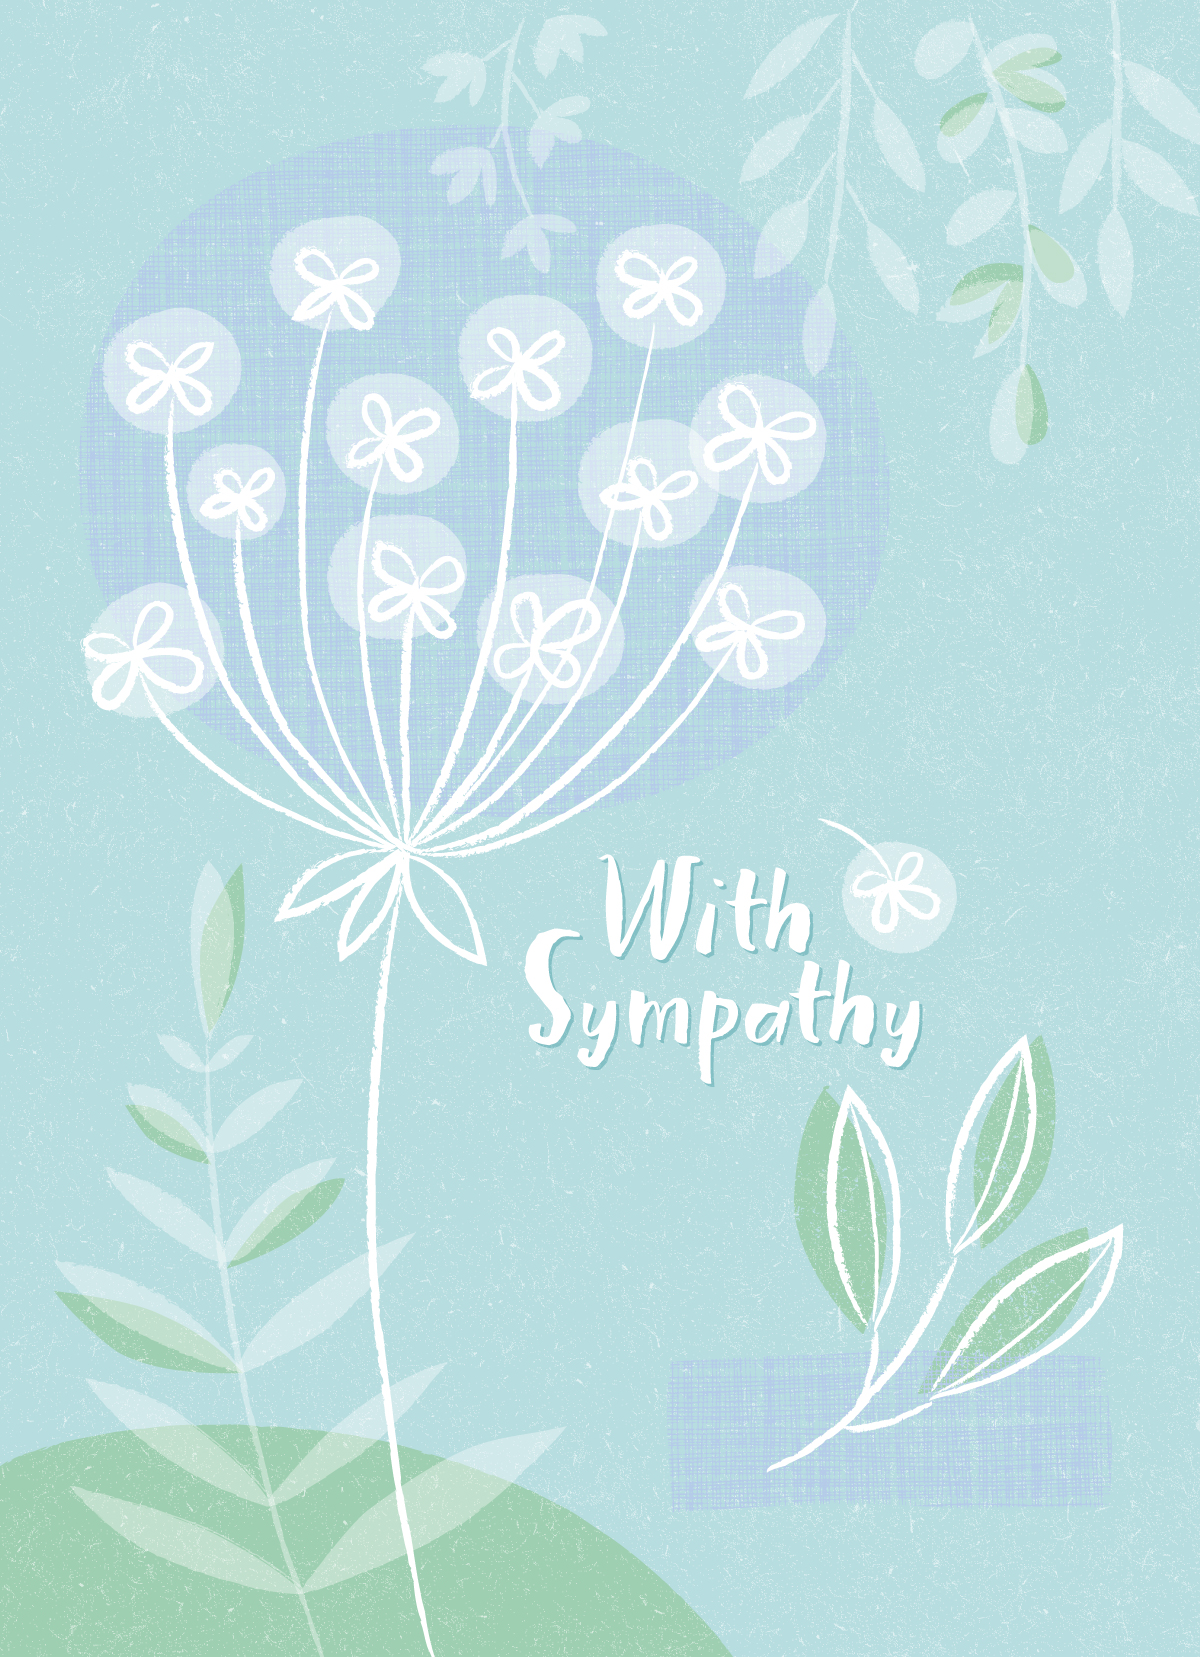 Sympathy Greeting Card for Design House Greetings